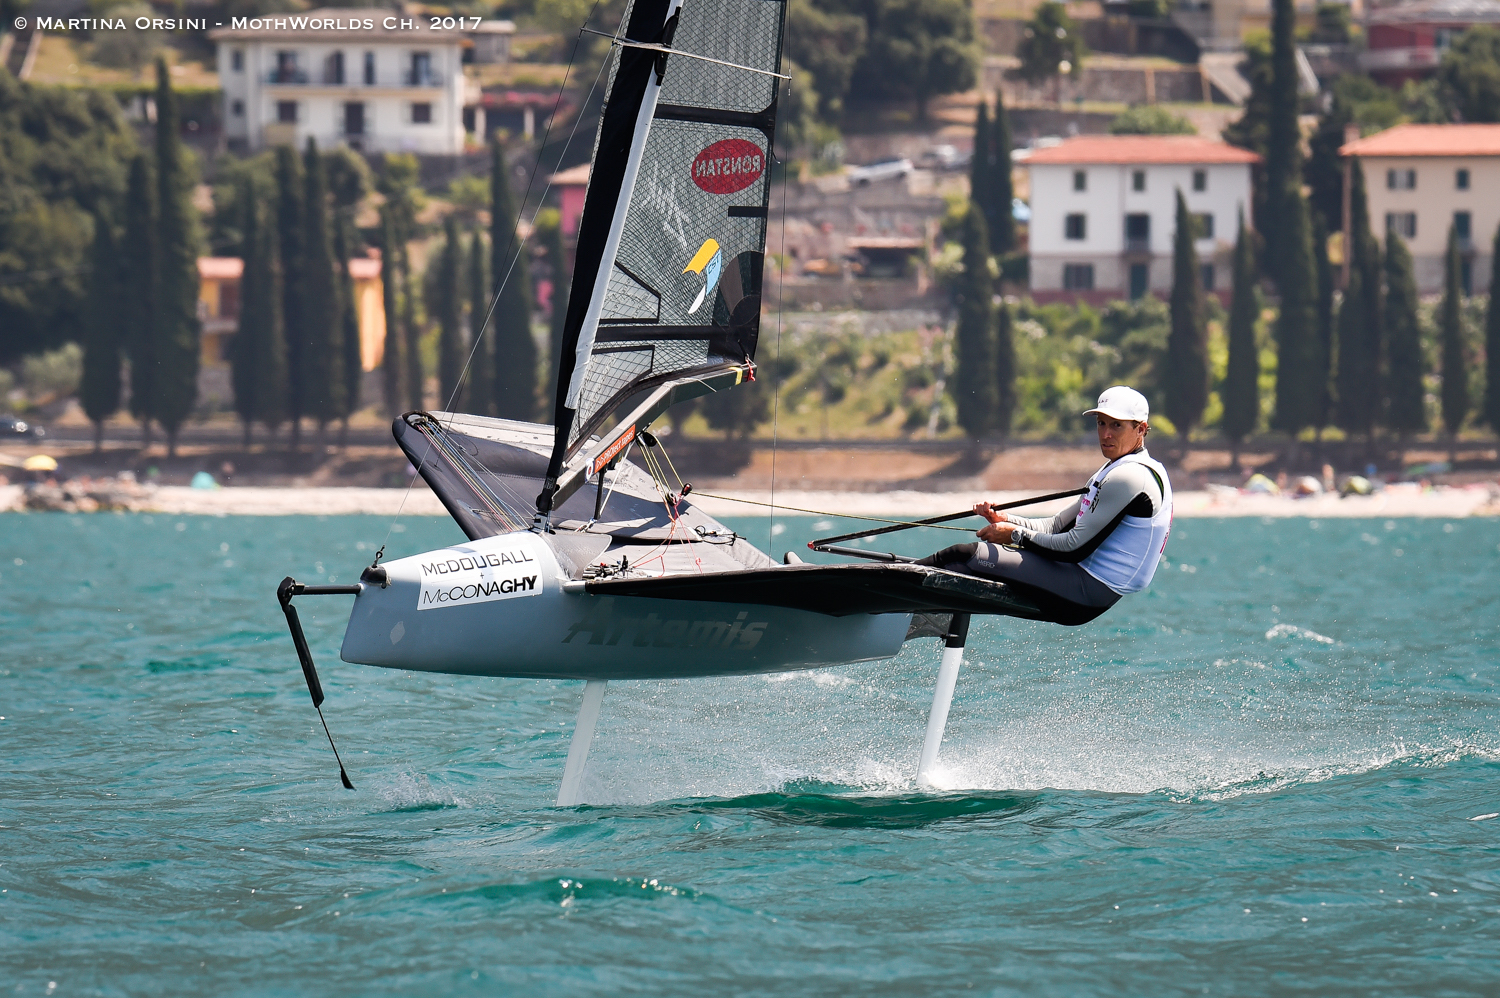 Standby – The most competitive Moth Worlds ever is nearly here